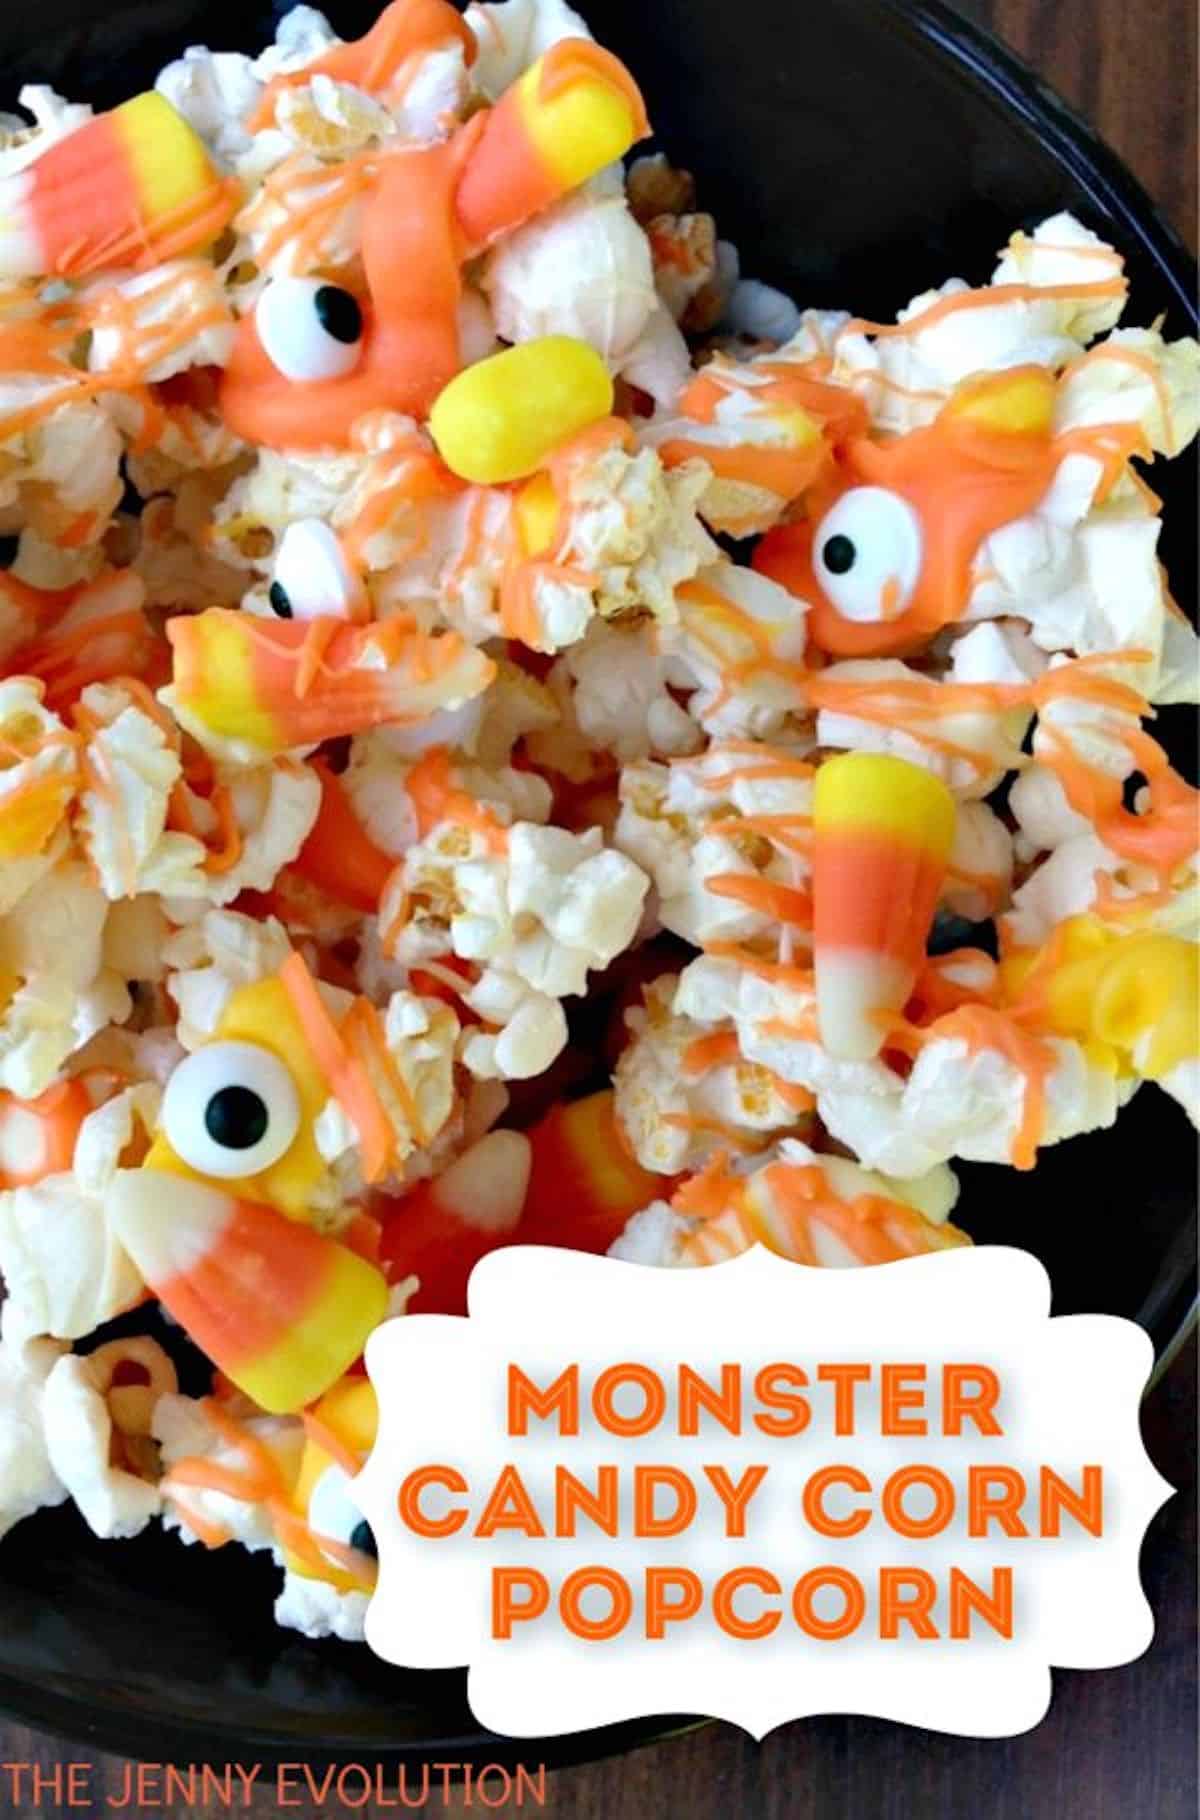 Close-up of colorful Monster popcorn with candy corn.